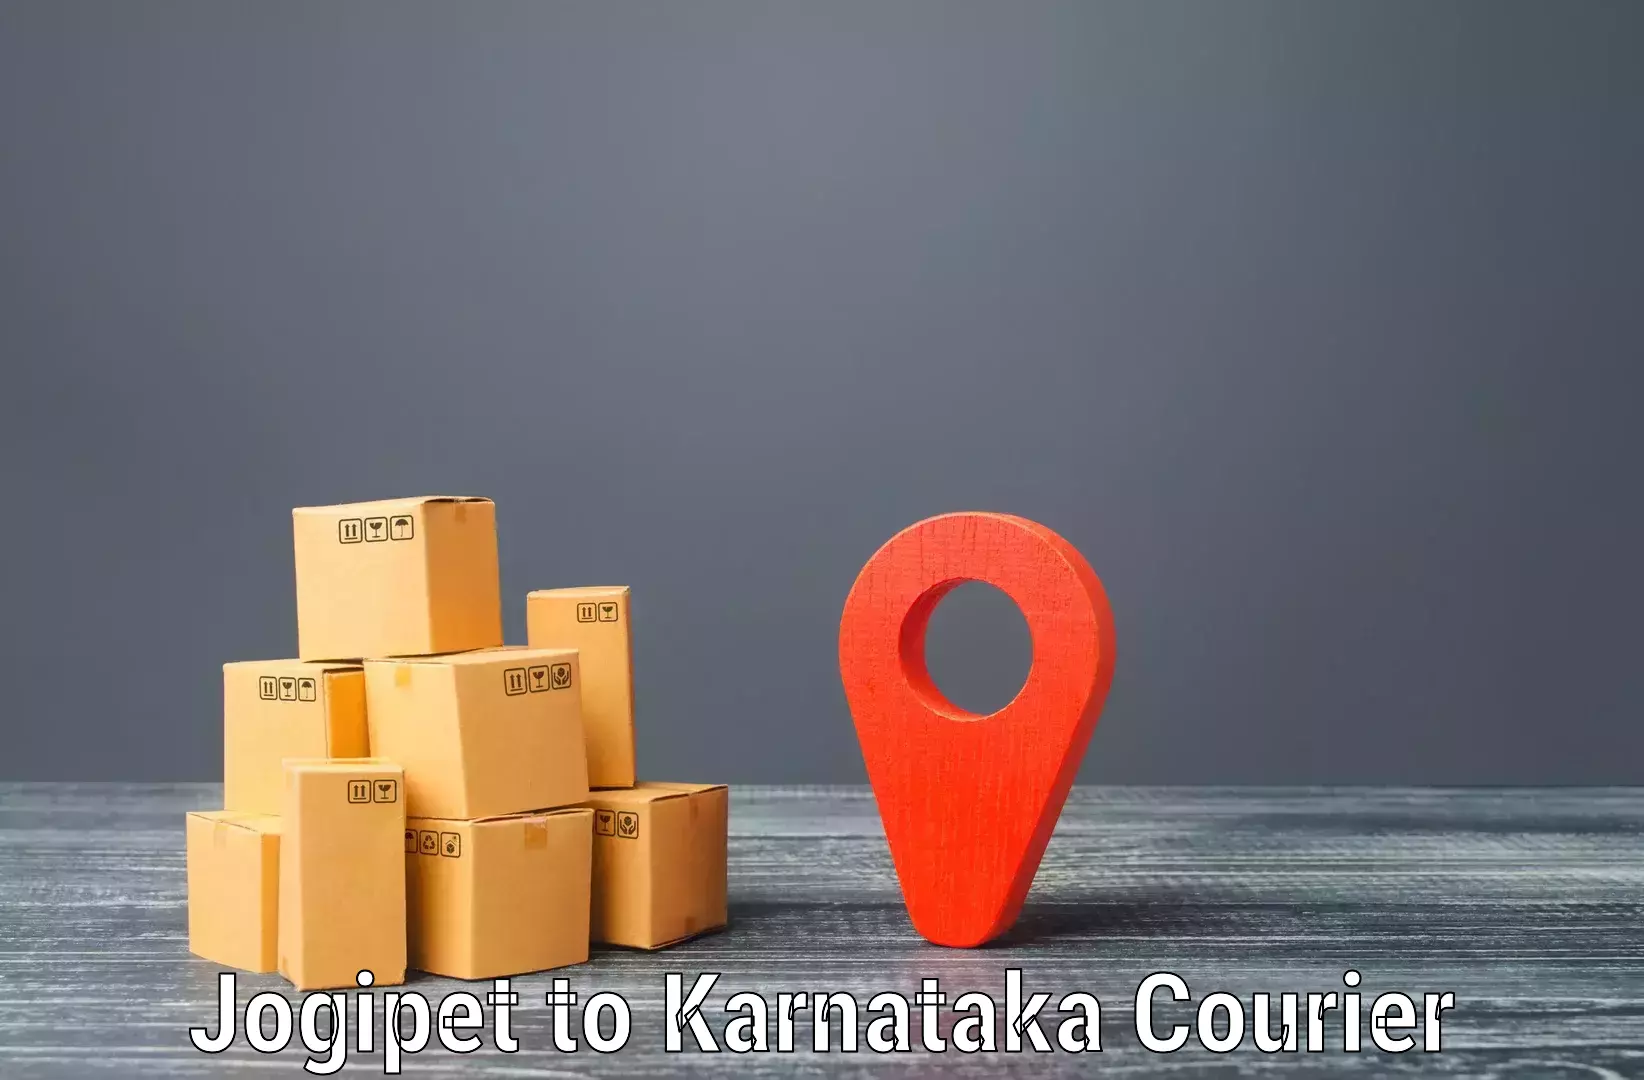 Wholesale parcel delivery in Jogipet to Karnataka